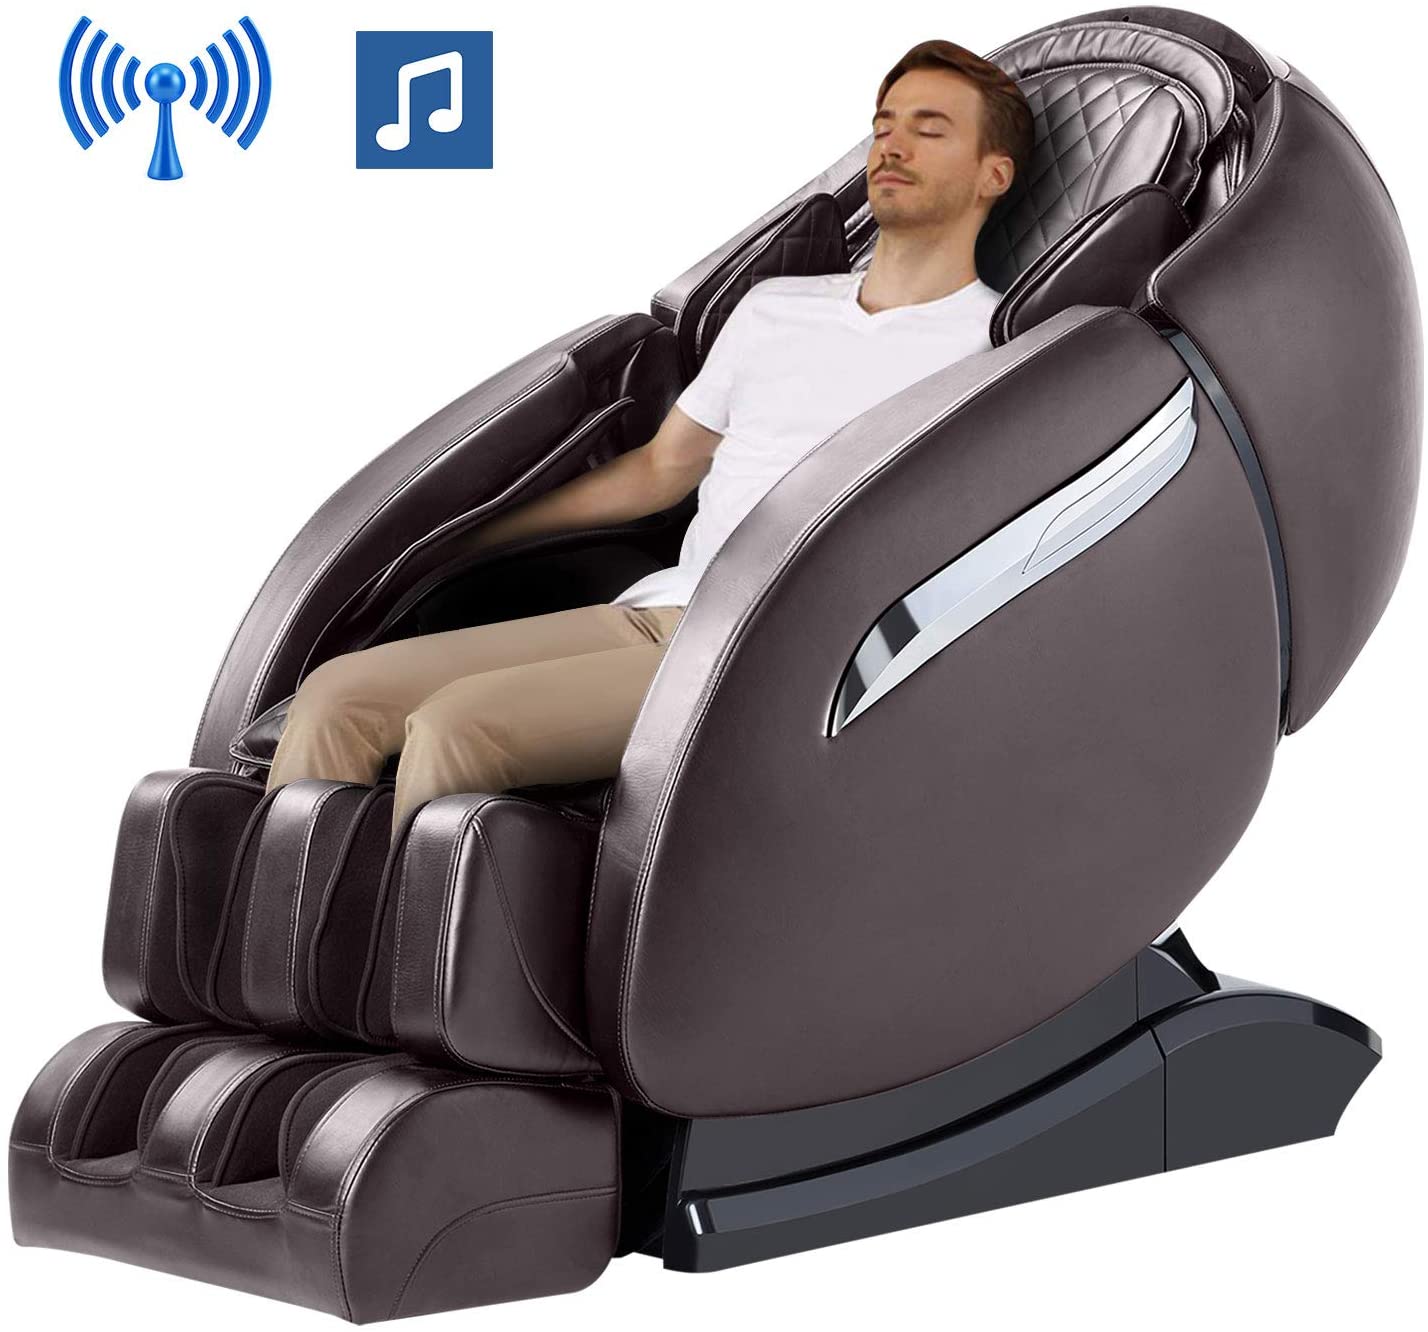 SL-Track Massage Chair by OOTORI